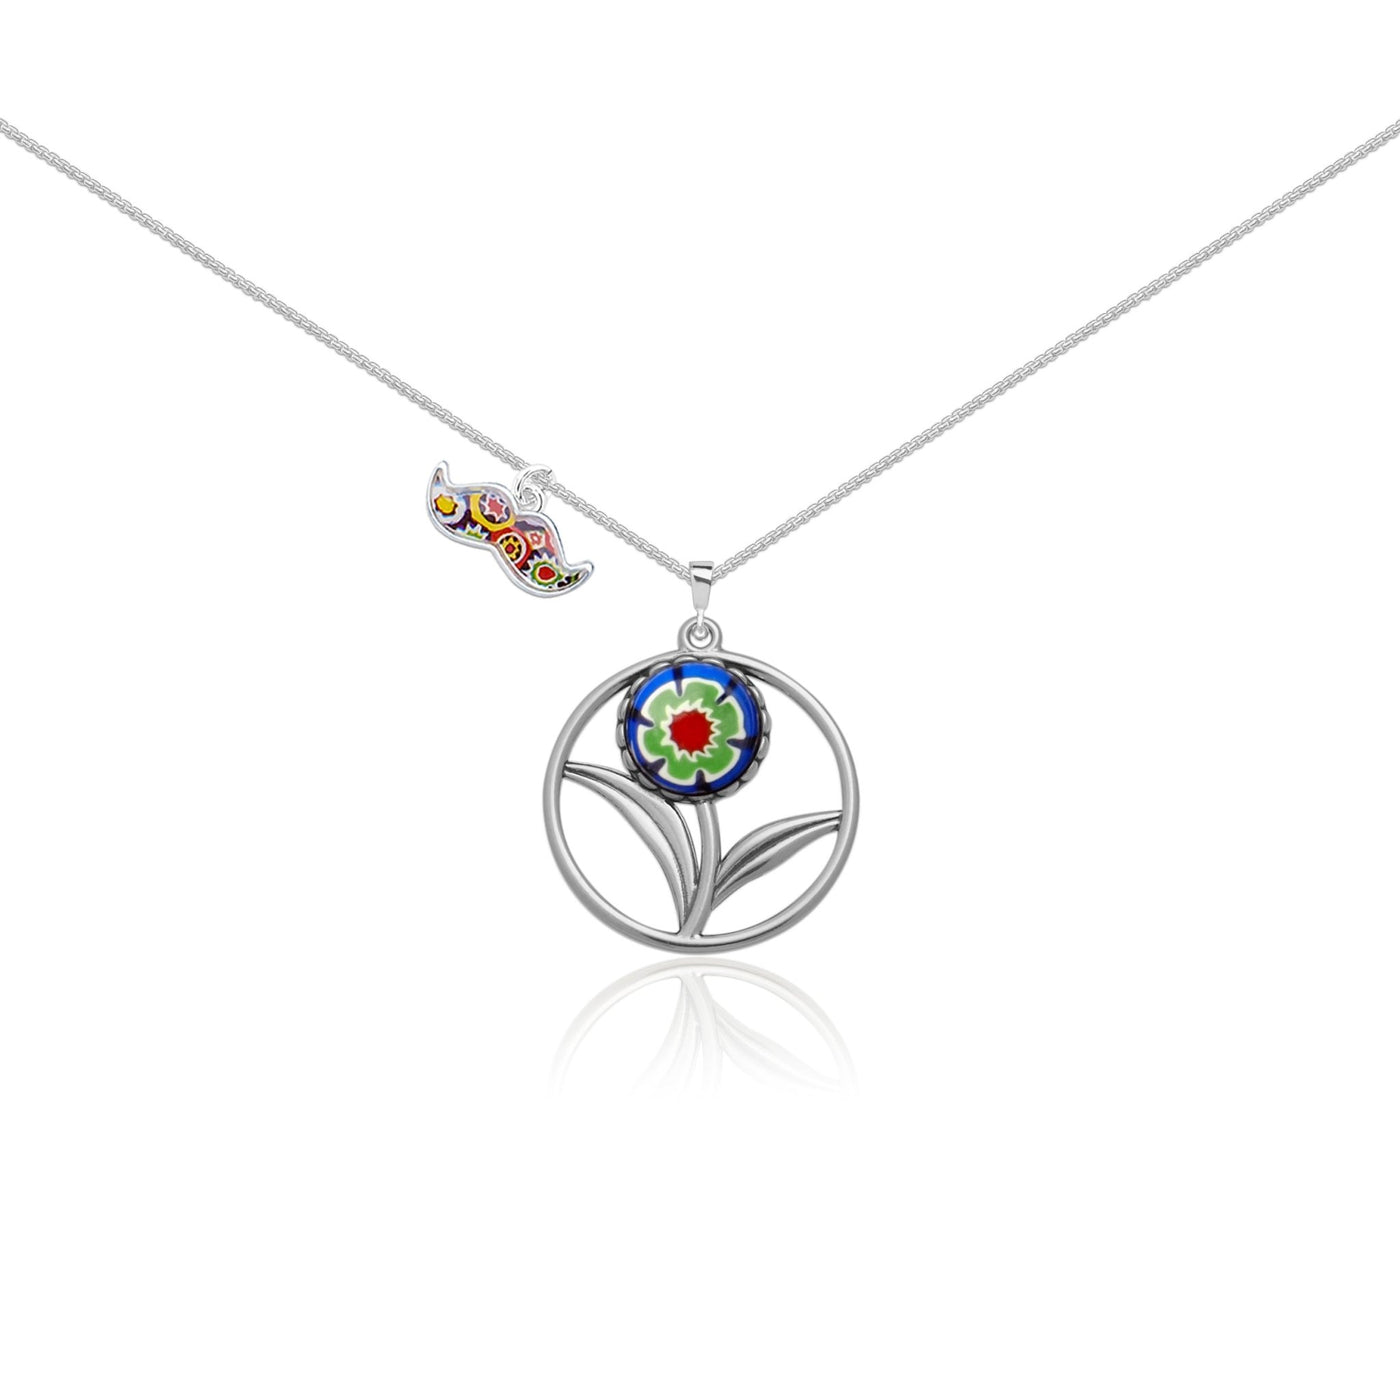 A Flower in Bloom Necklace - Blue Flower 1 - Pendant Necklace